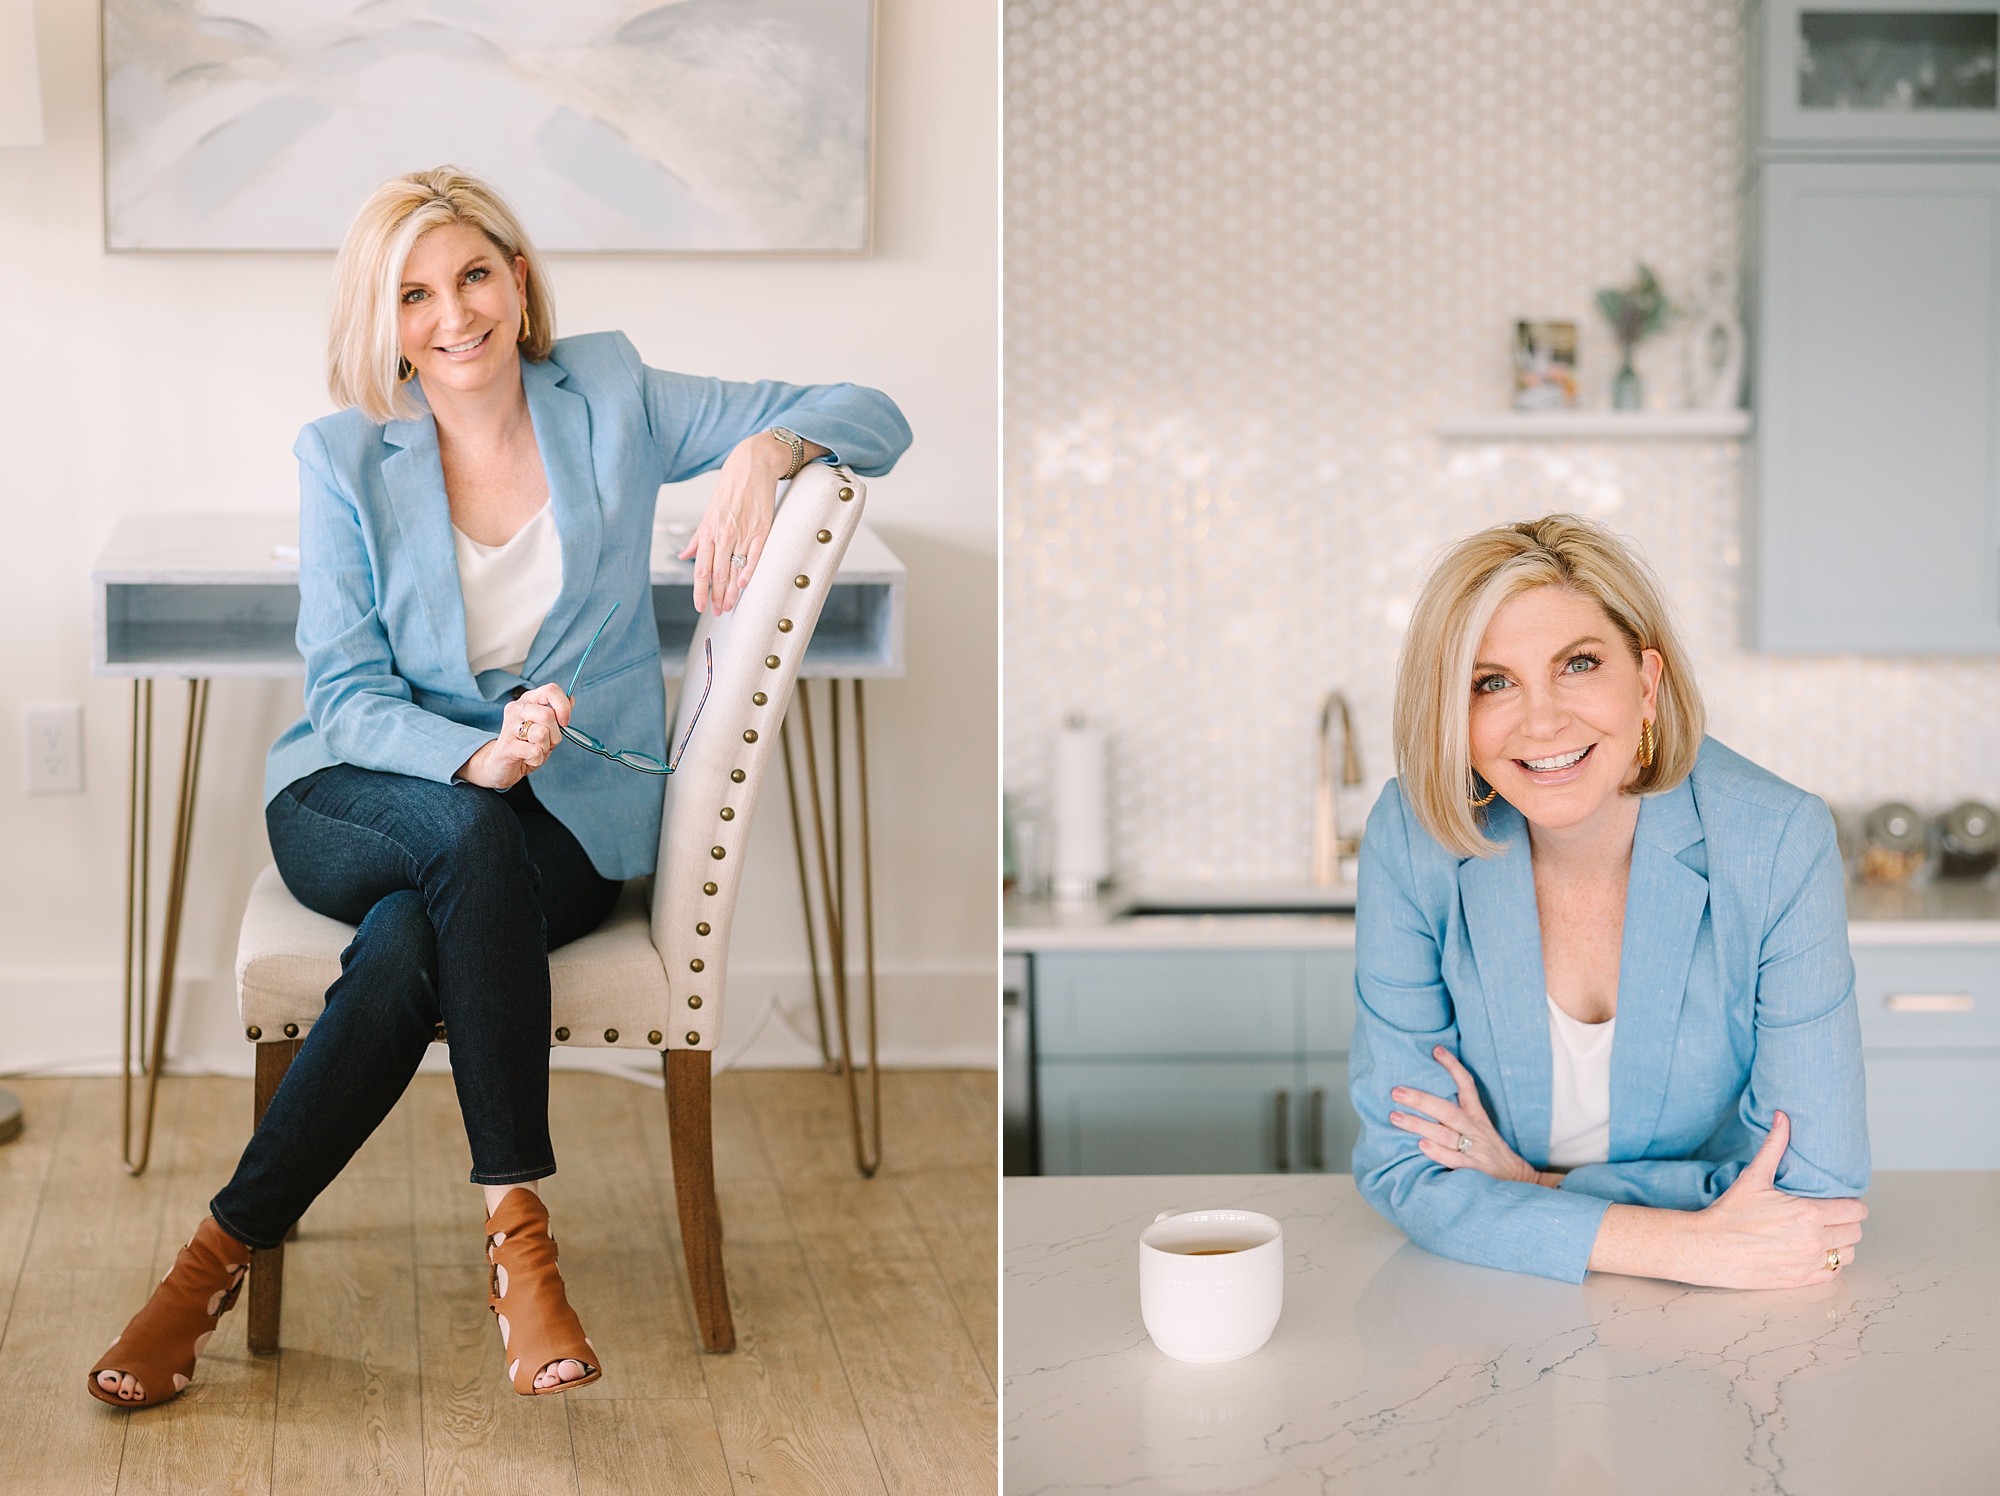 Tips to have a successful brand session: Amy Allmand Photography shares her brand shoot checklist for business owners